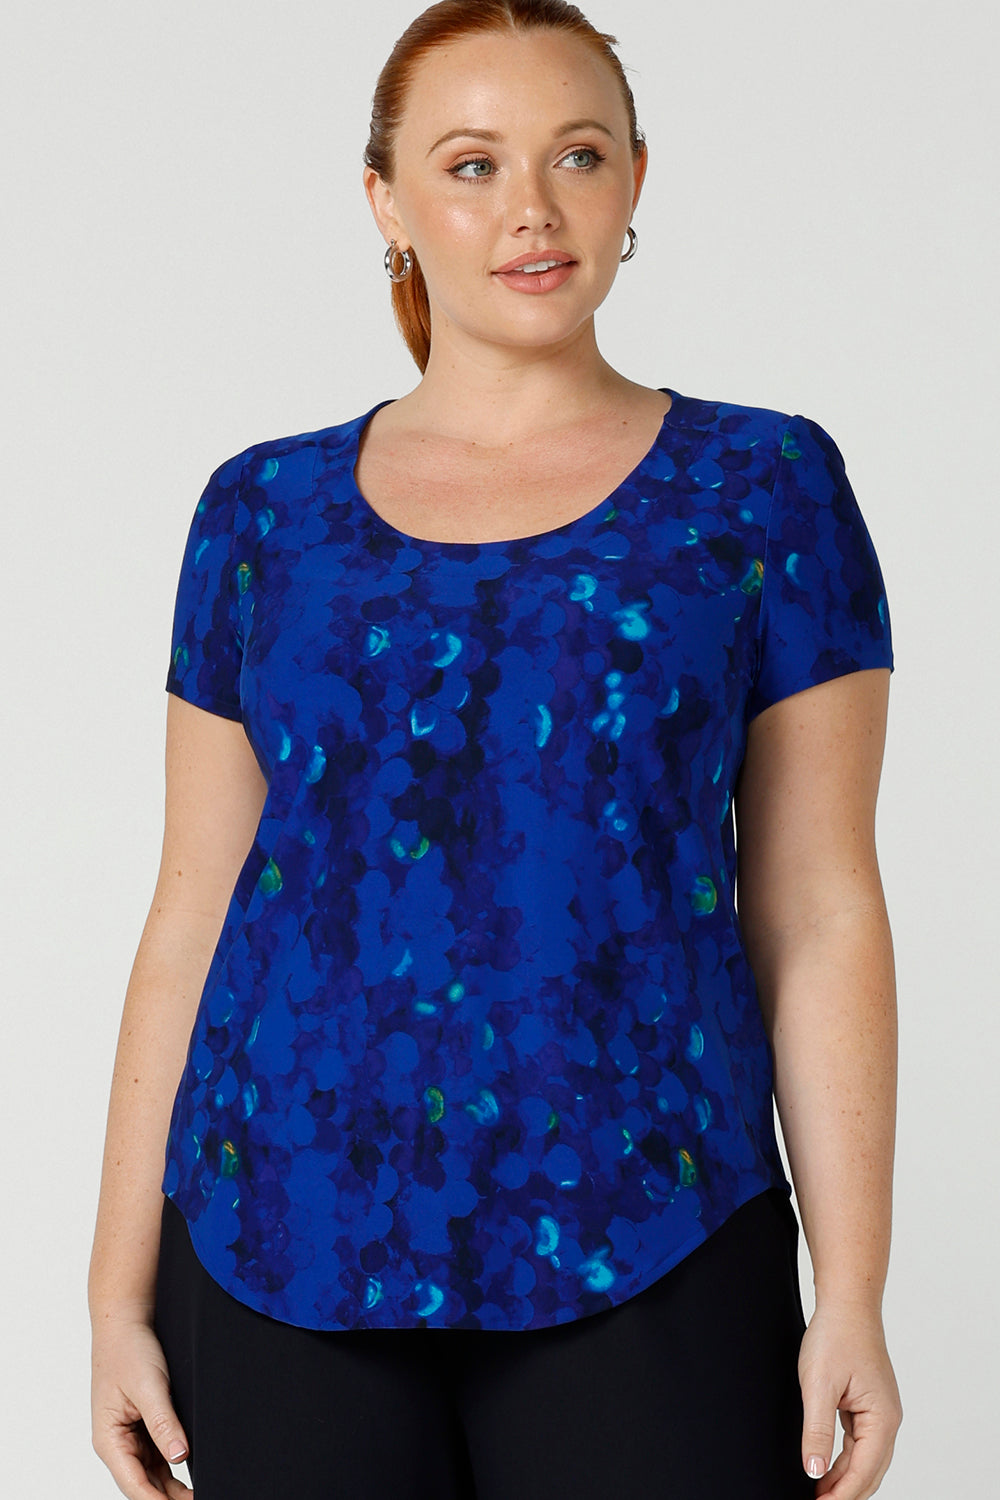 A curvy, size 12 woman wears a cobalt abstract jersey print, Round neck top with short sleeves. A good top for summer casual wear, or style tucked as a workwear top. Shop made in Australia tops in petite to plus sizes online at Australian fashion brand, Leina & Fleur.